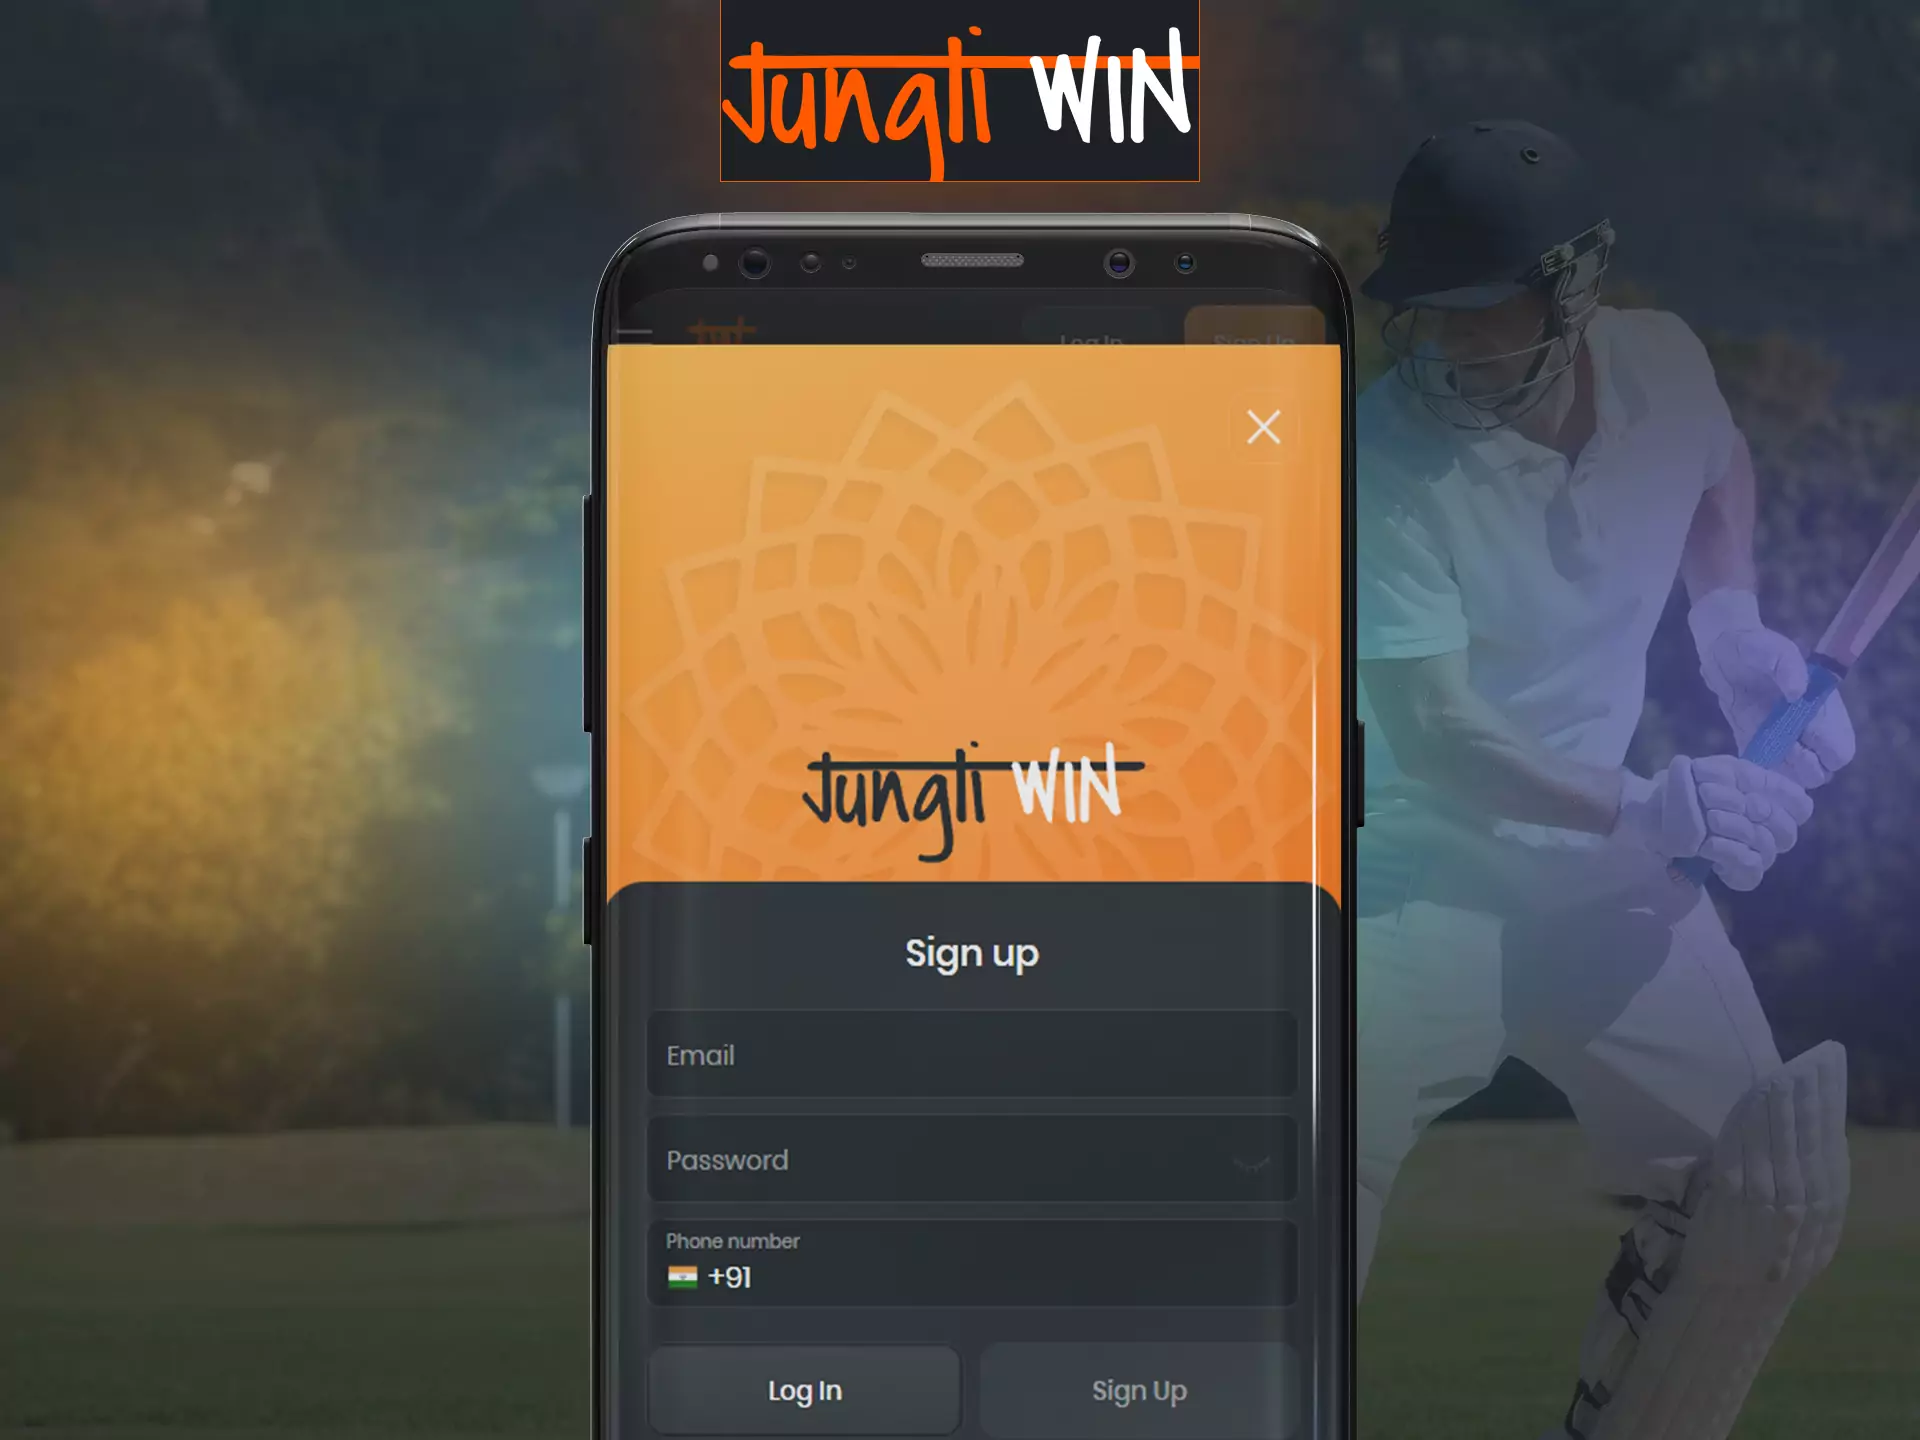 Go through a simple registration in the Jungliwin application and use all the advantages of the service.